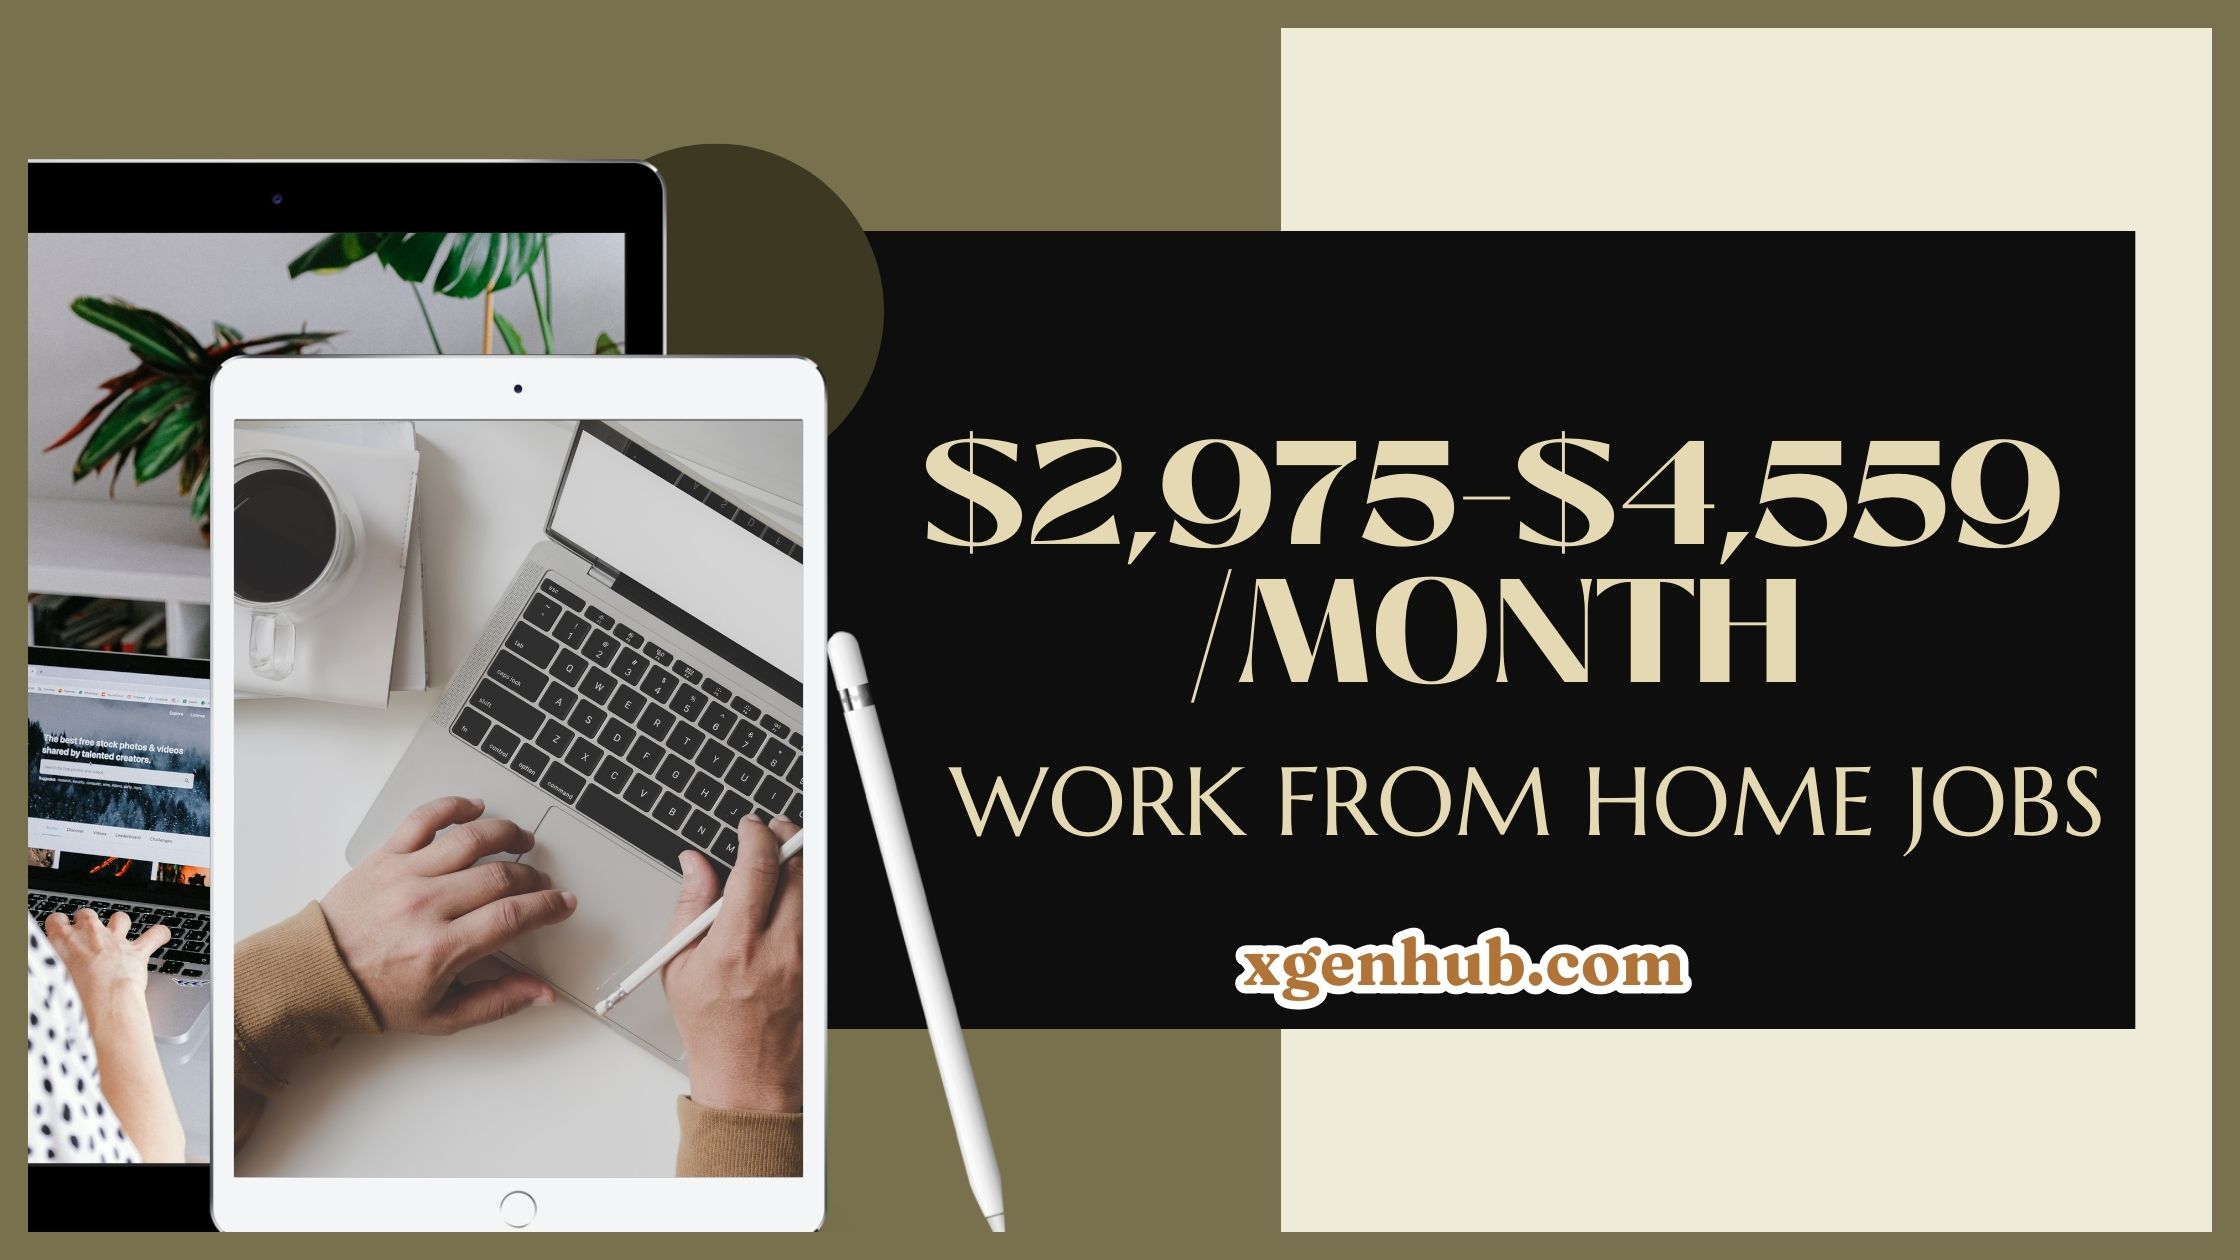 GET PAID! $2,975-$4,559/MONTH TO RESET PASSWORDS WORK FROM HOME JOBS